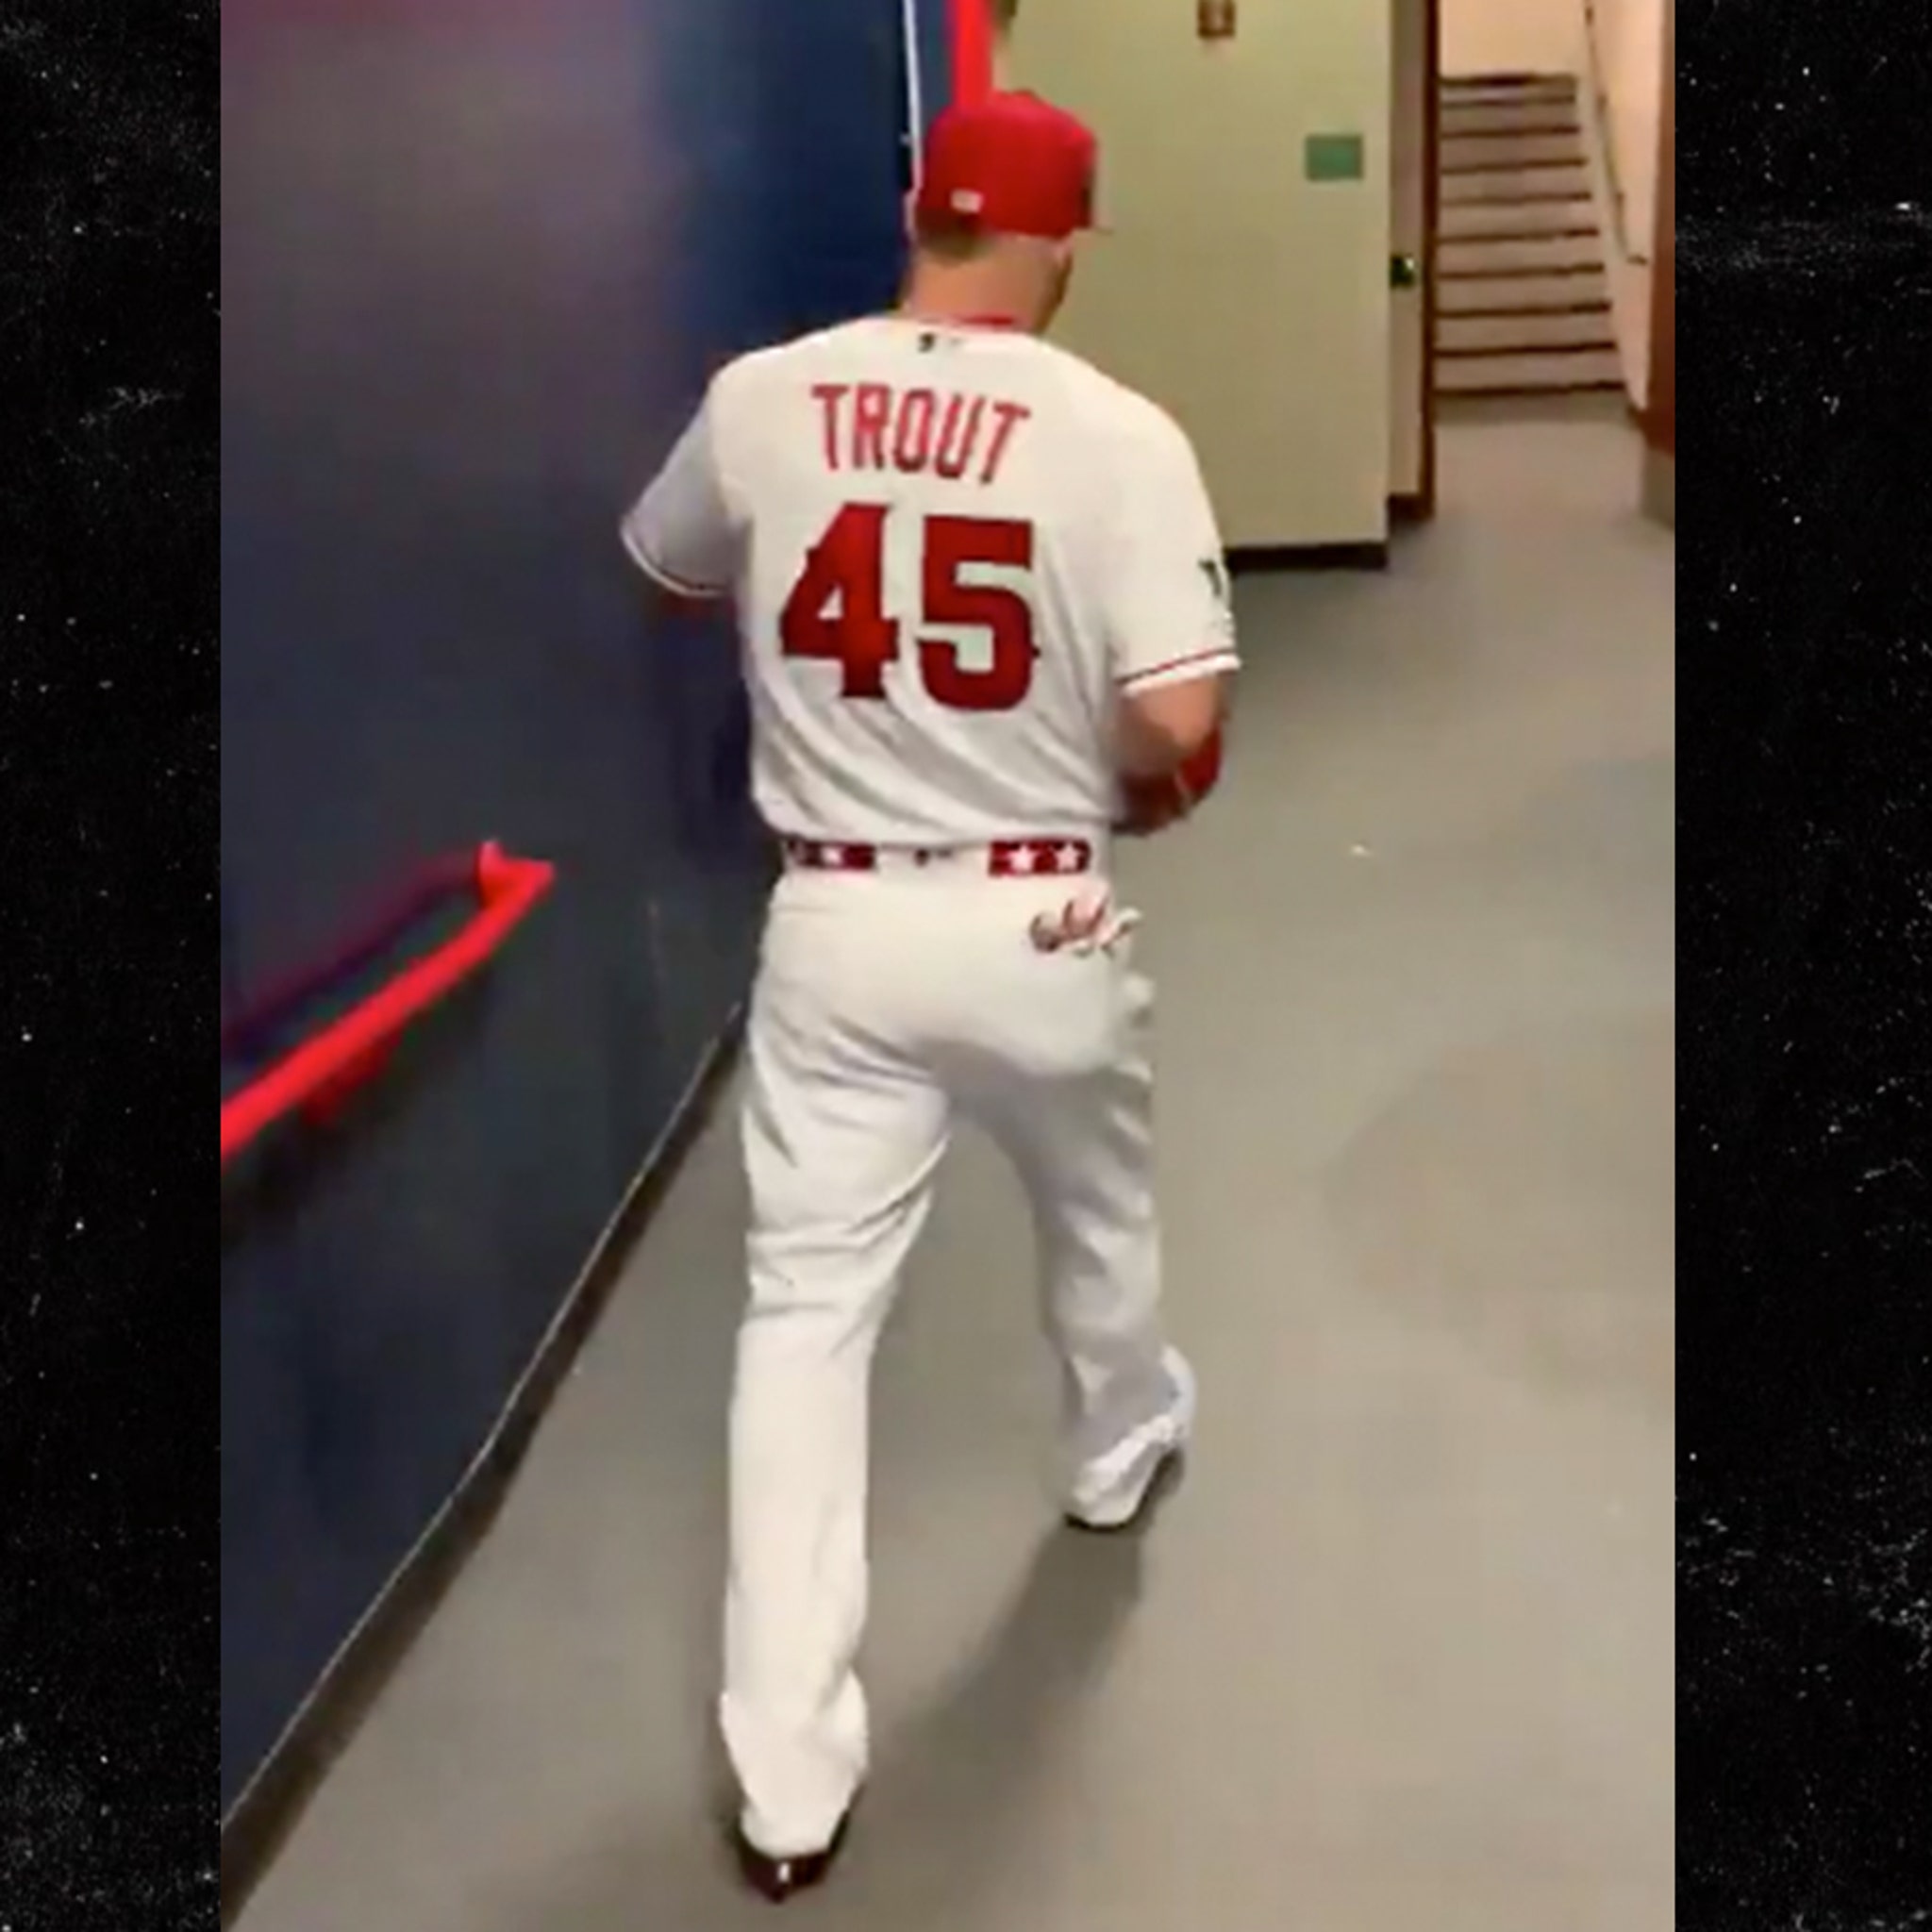 mike trout jersey for sale